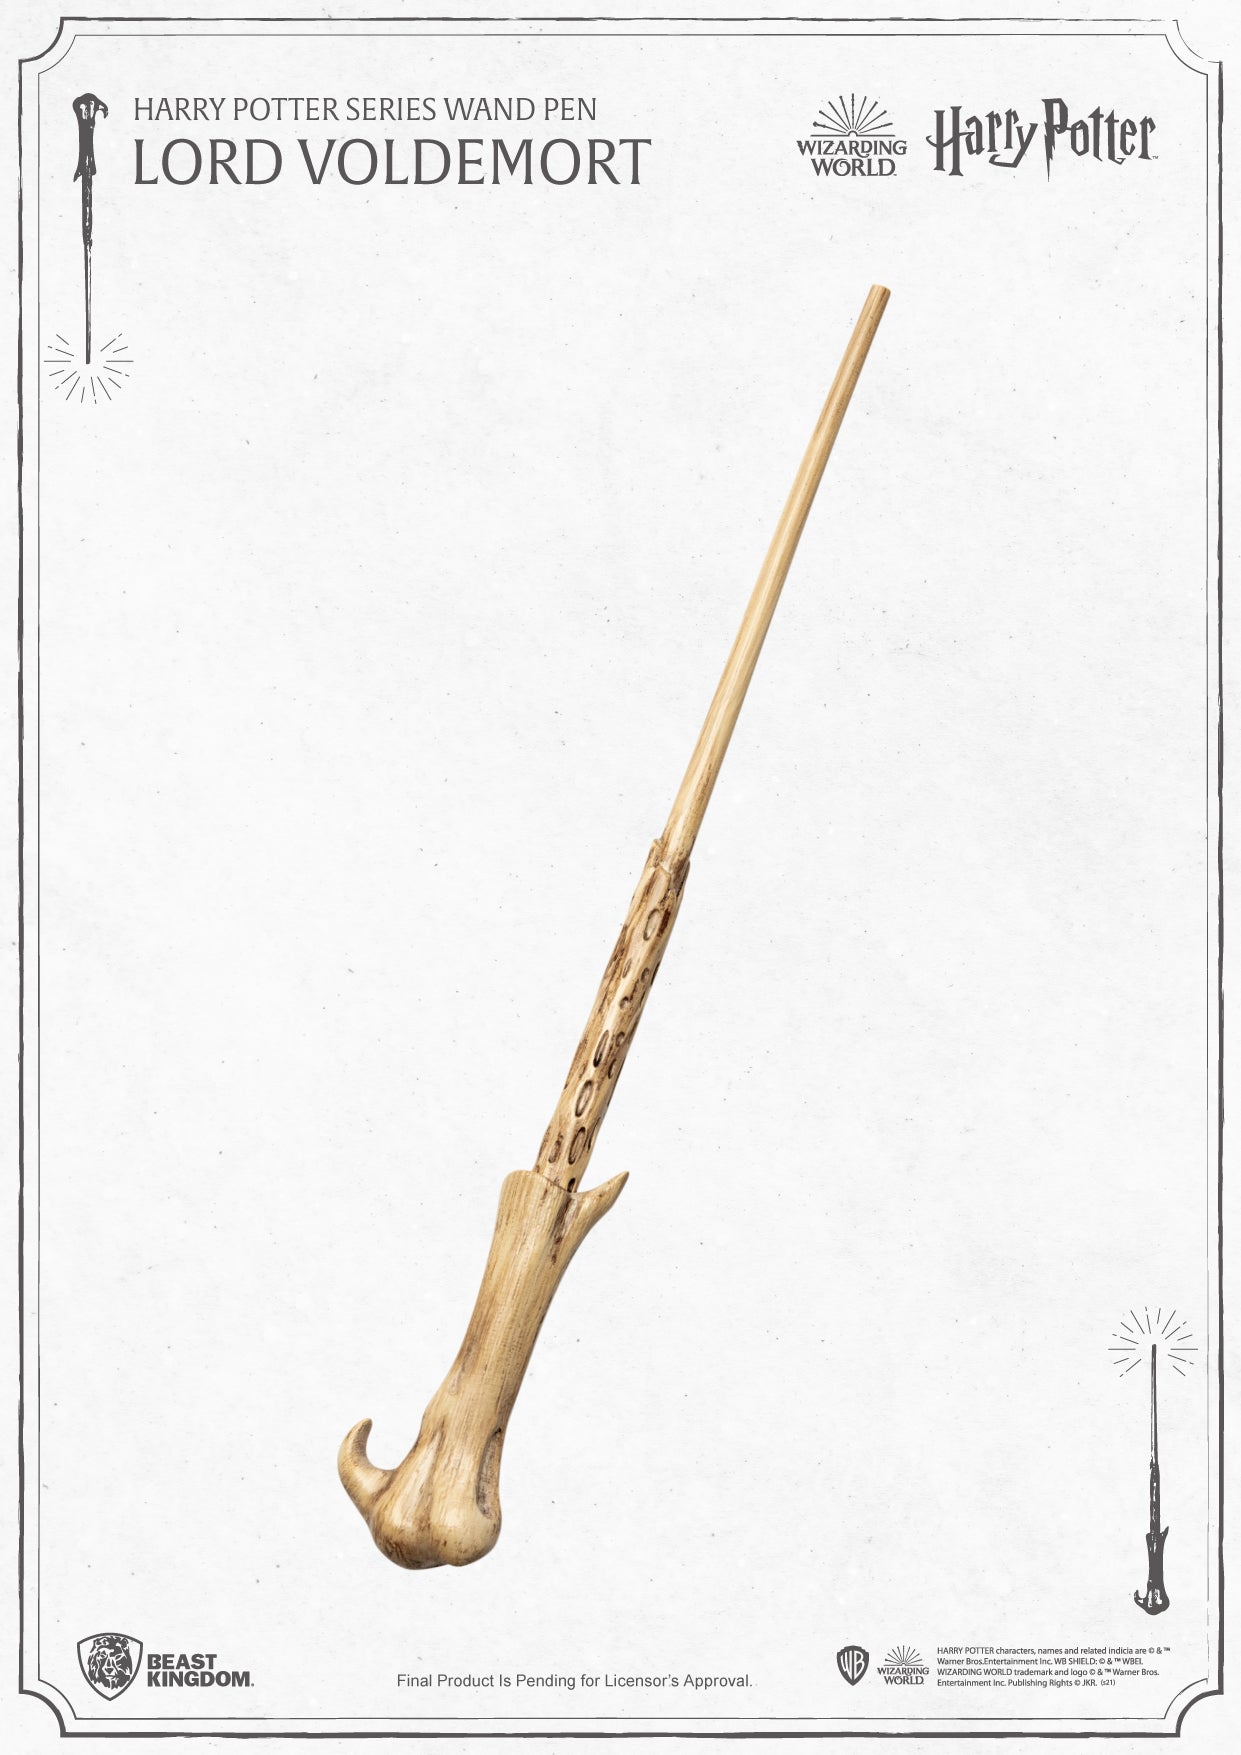 Harry Potter Series Wand Pen Lord Voldemort